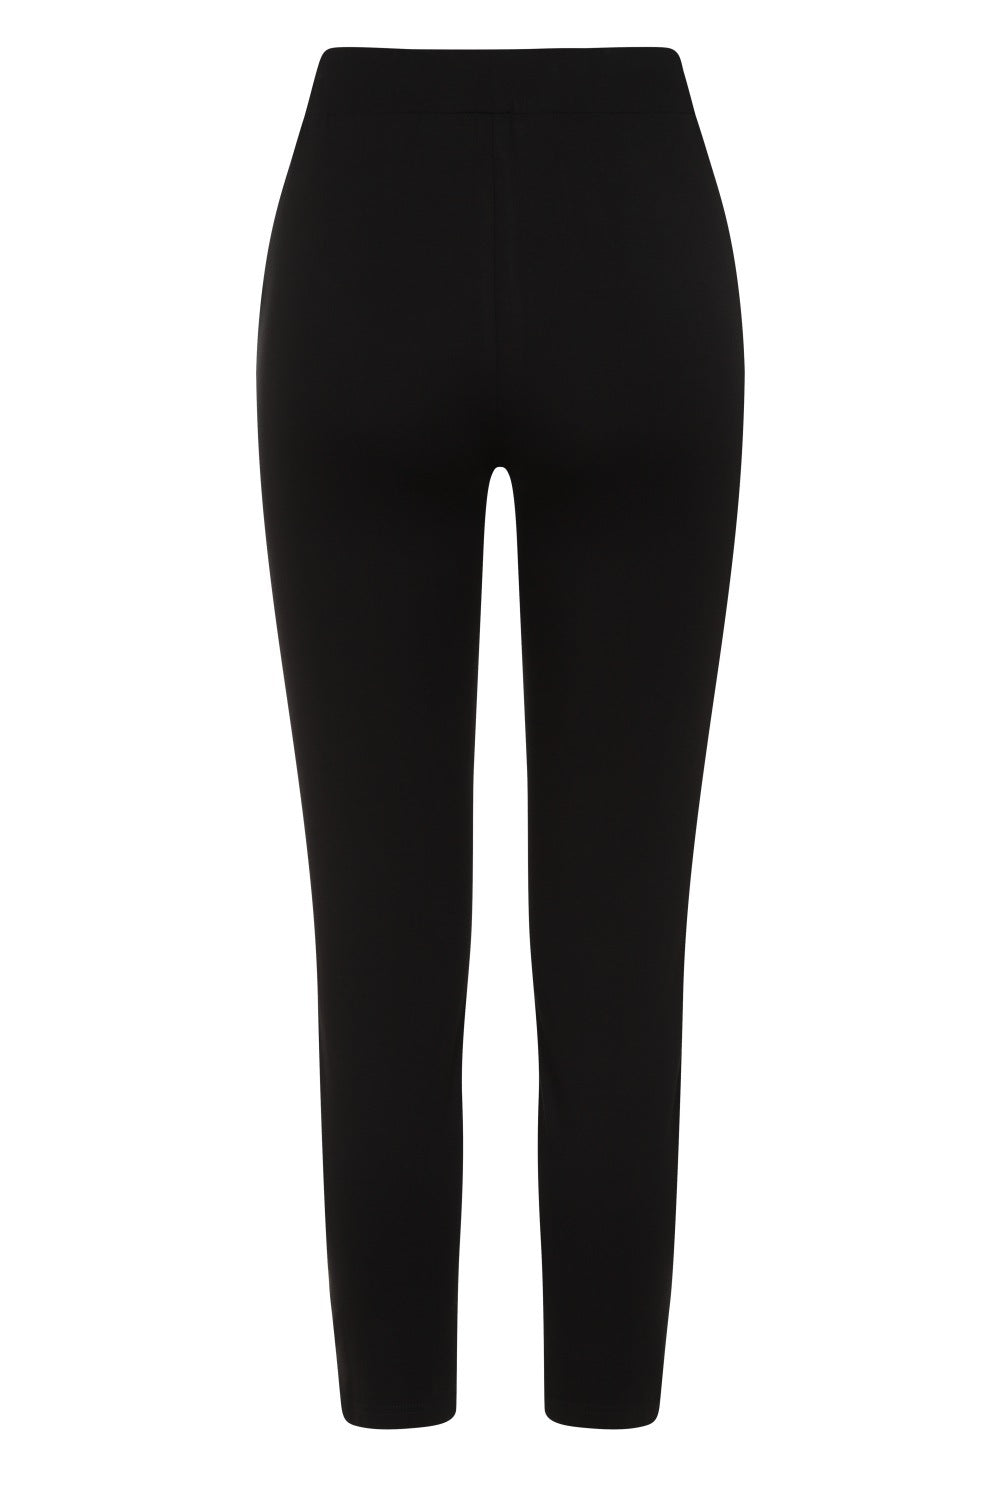 High waist black leggings with mesh moon and cat on one leg 